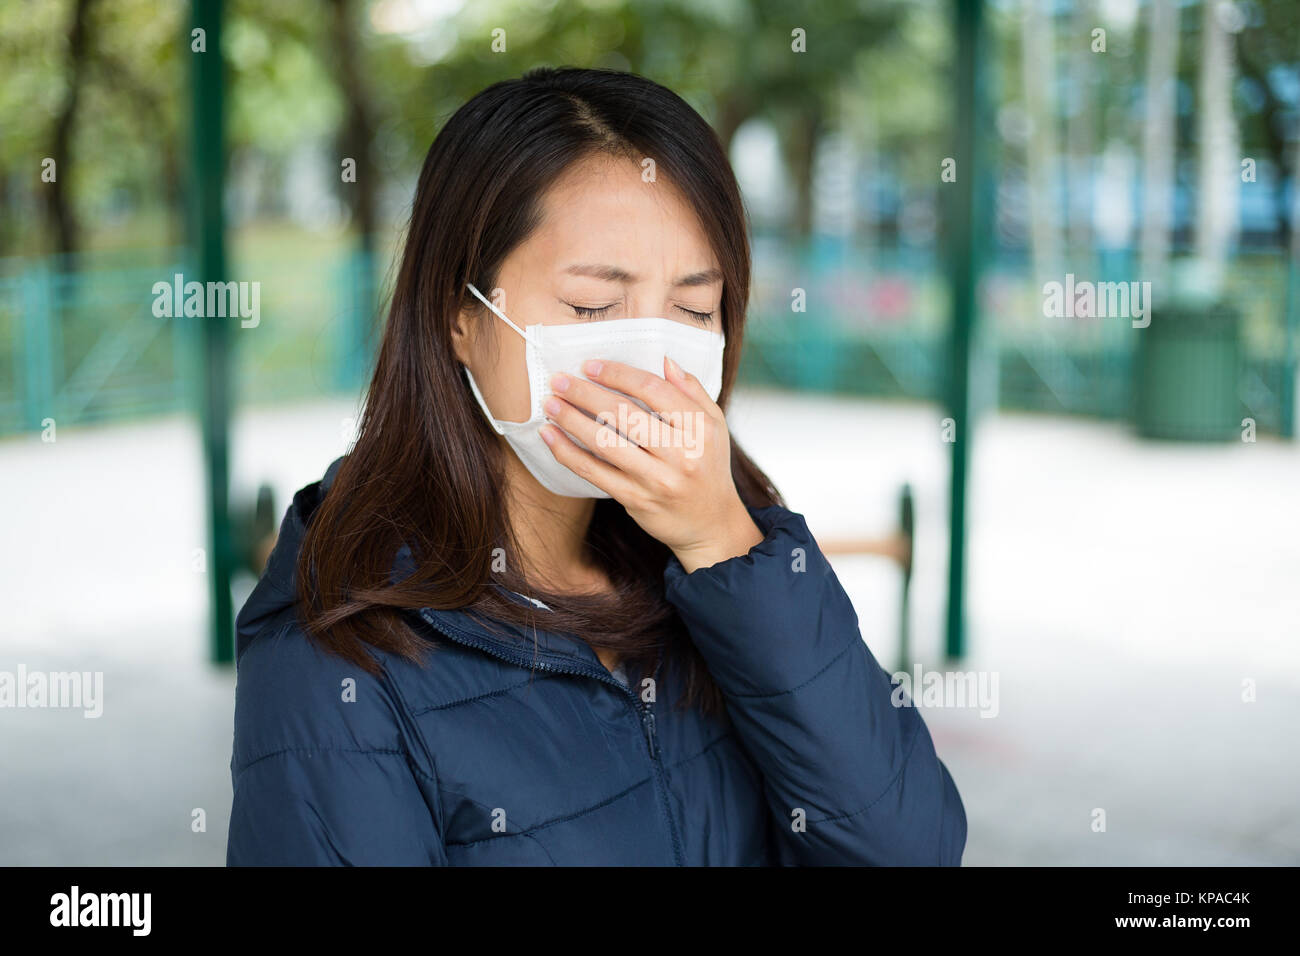 Woman wearing protective face mask Stock Photo - Alamy